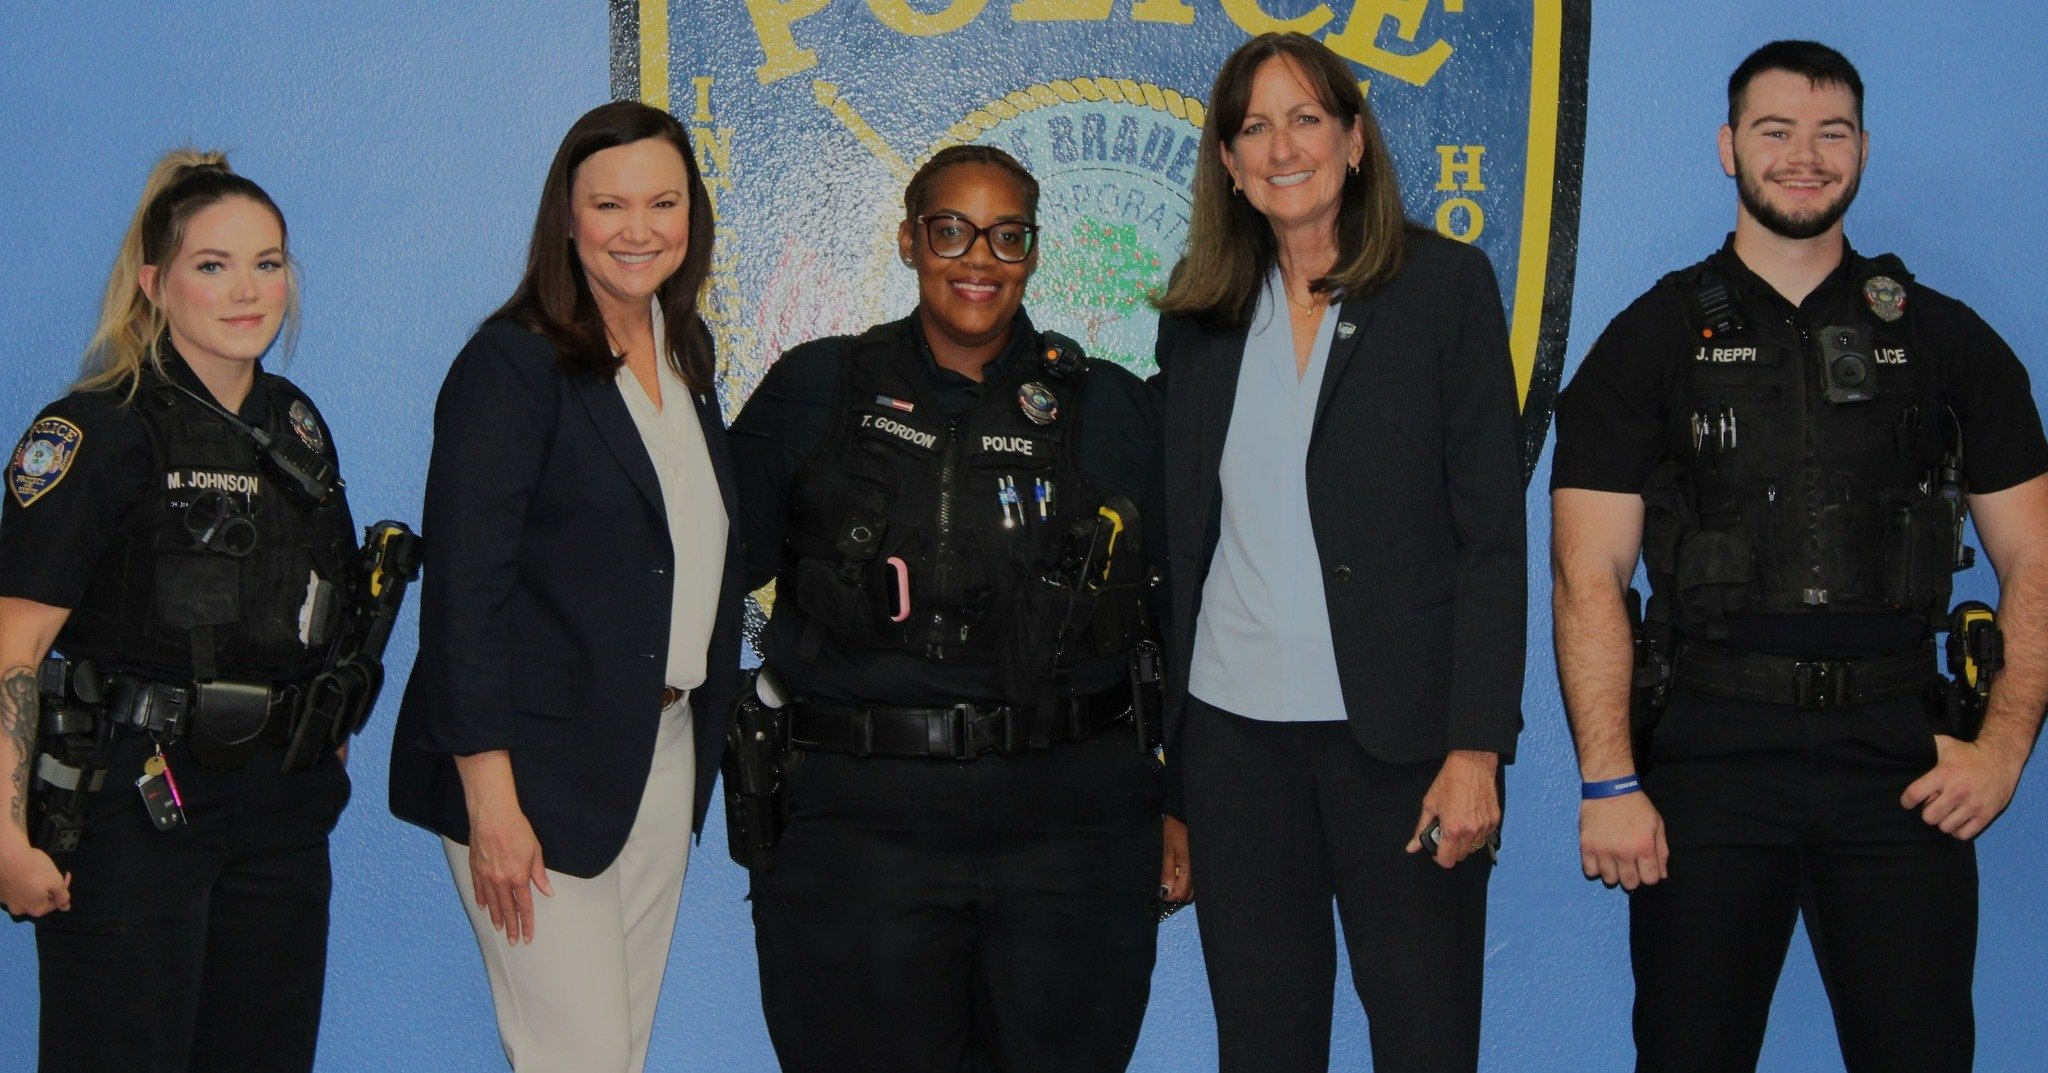 Florida Attorney General Ashley Moody visited BPD to learn more about the measures BPD is taking to combat fraud against seniors and vulnerable adults - and to say hi during our afternoon Bravo-shift roll call. Florida's Adult Protective Services Pro